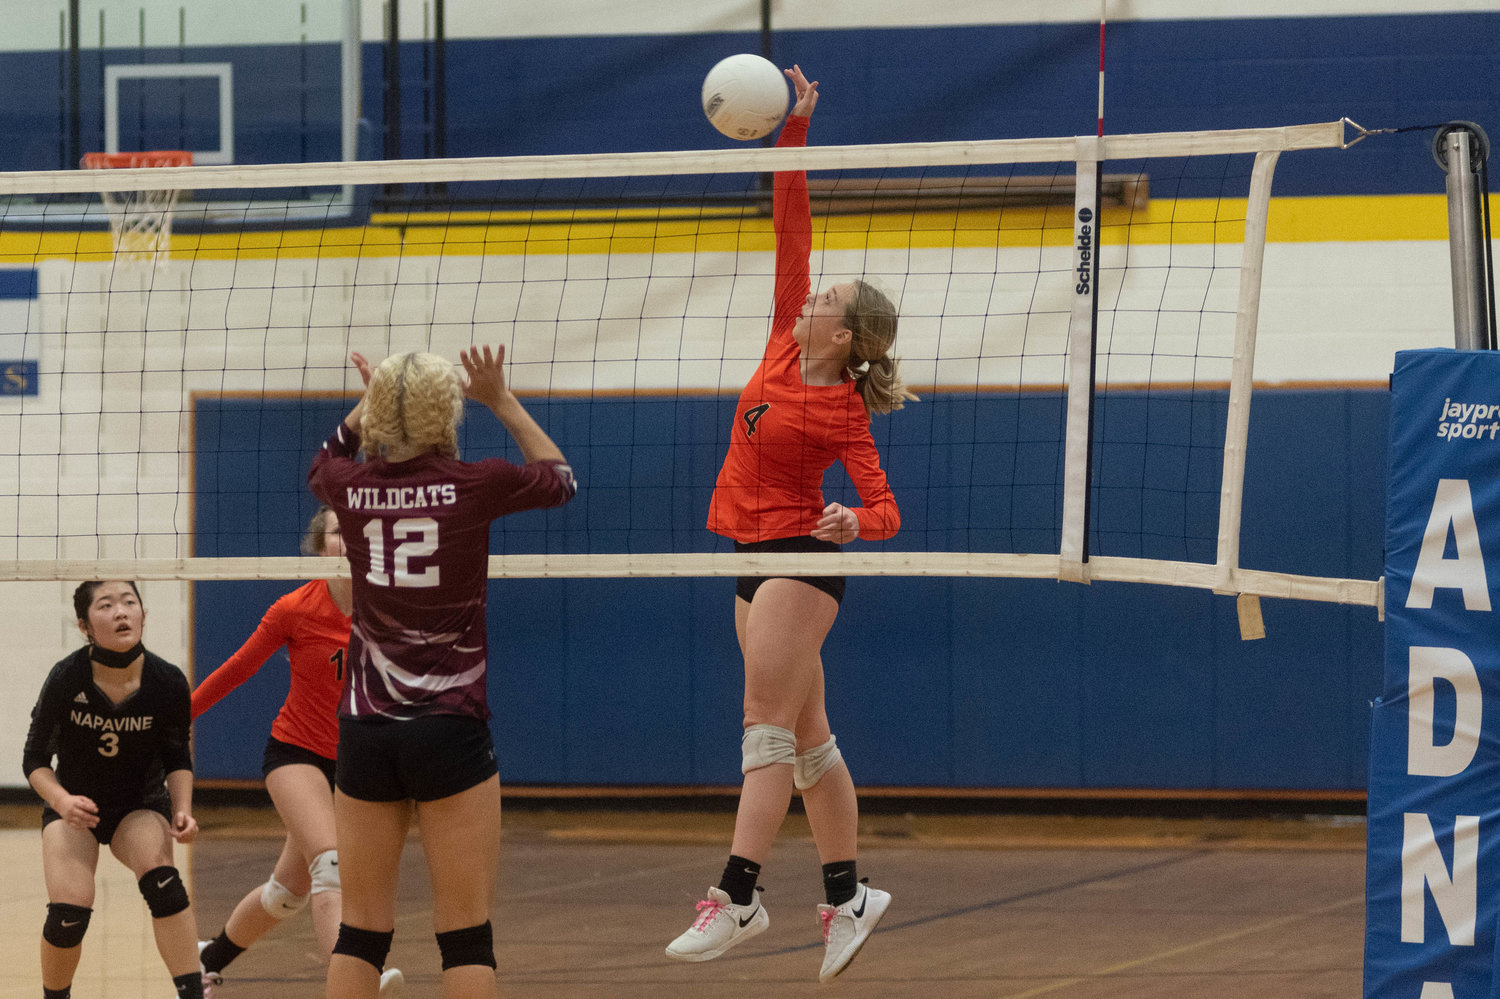 Napavine sophomore outside hitter Grace Gall goes up for a spike in the opening round of the District 4 Tournament in Adna Oct. 30.